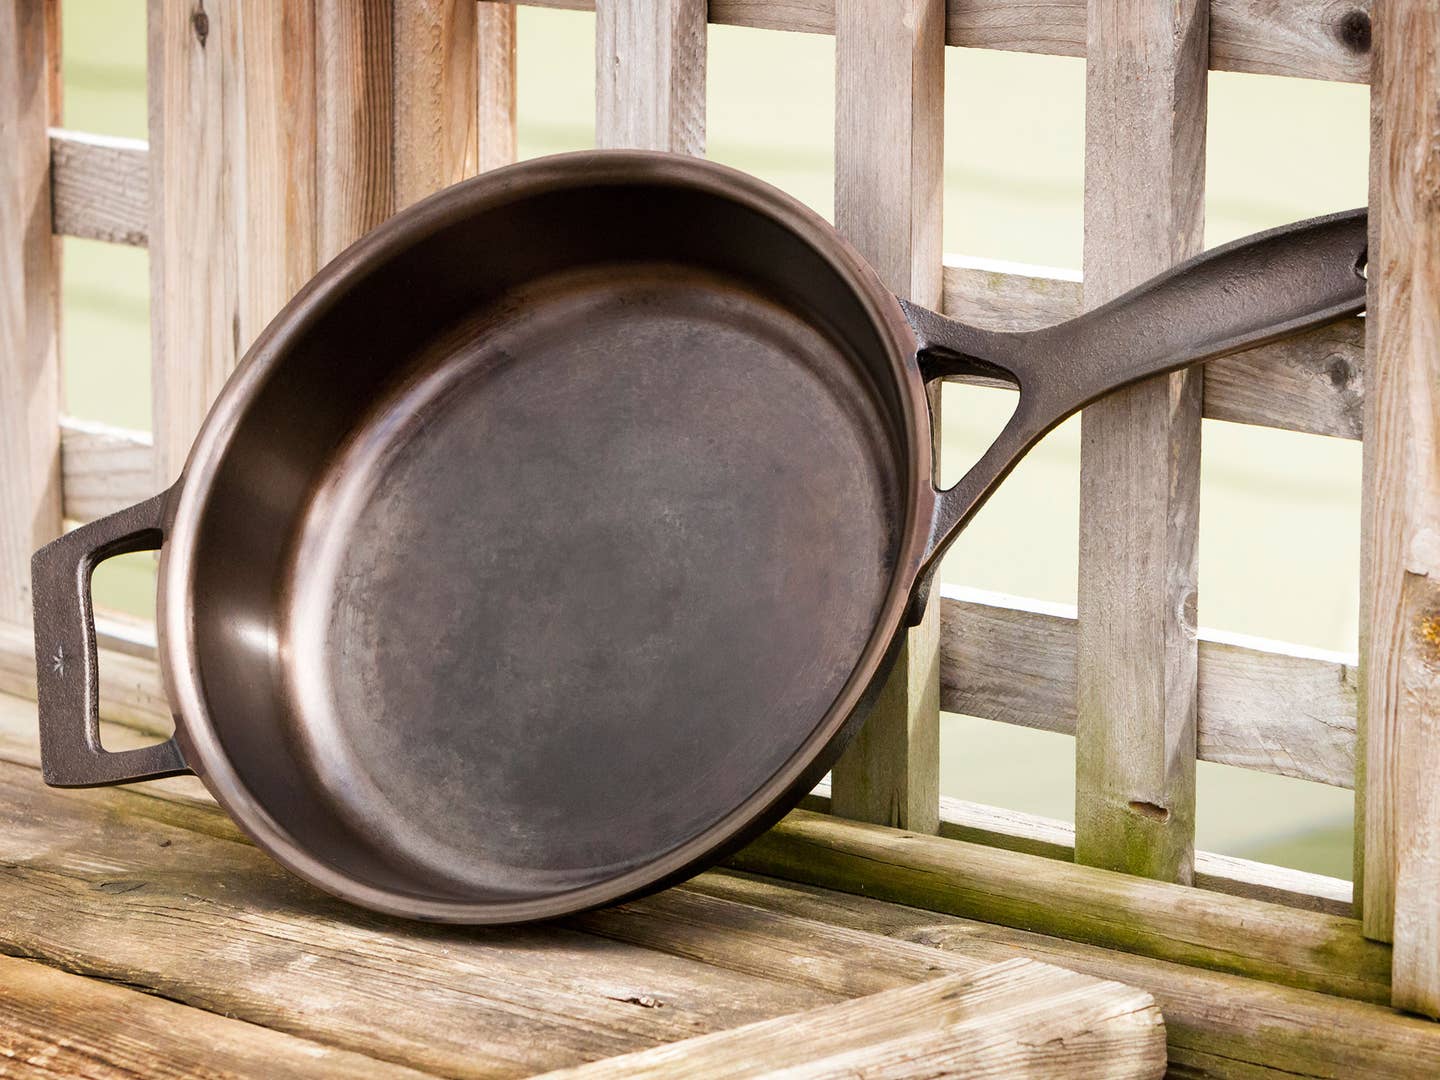 This is the Lamborghini of Cast Iron Skillets